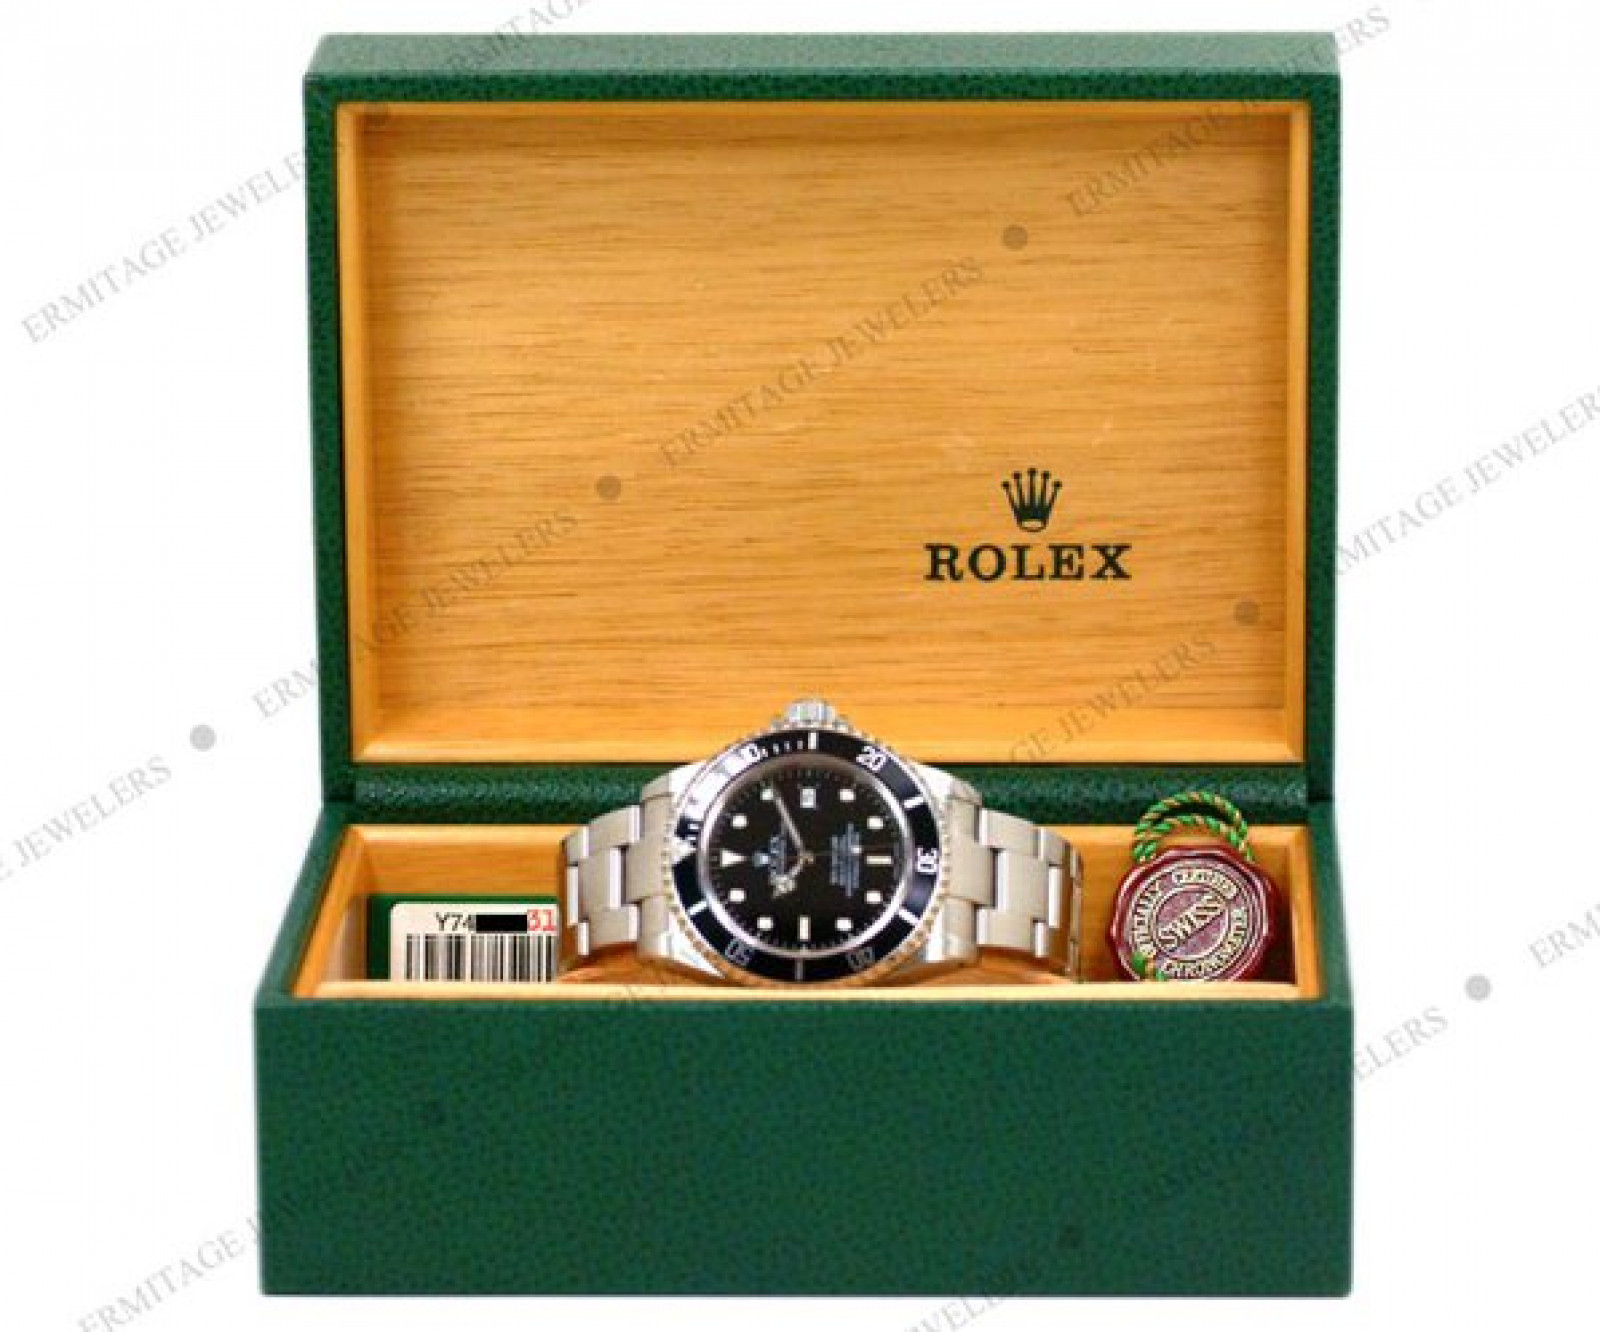 Pre-Owned Rolex Oyster Perpetual Sea-Dweller 16600 Steel Year 2004